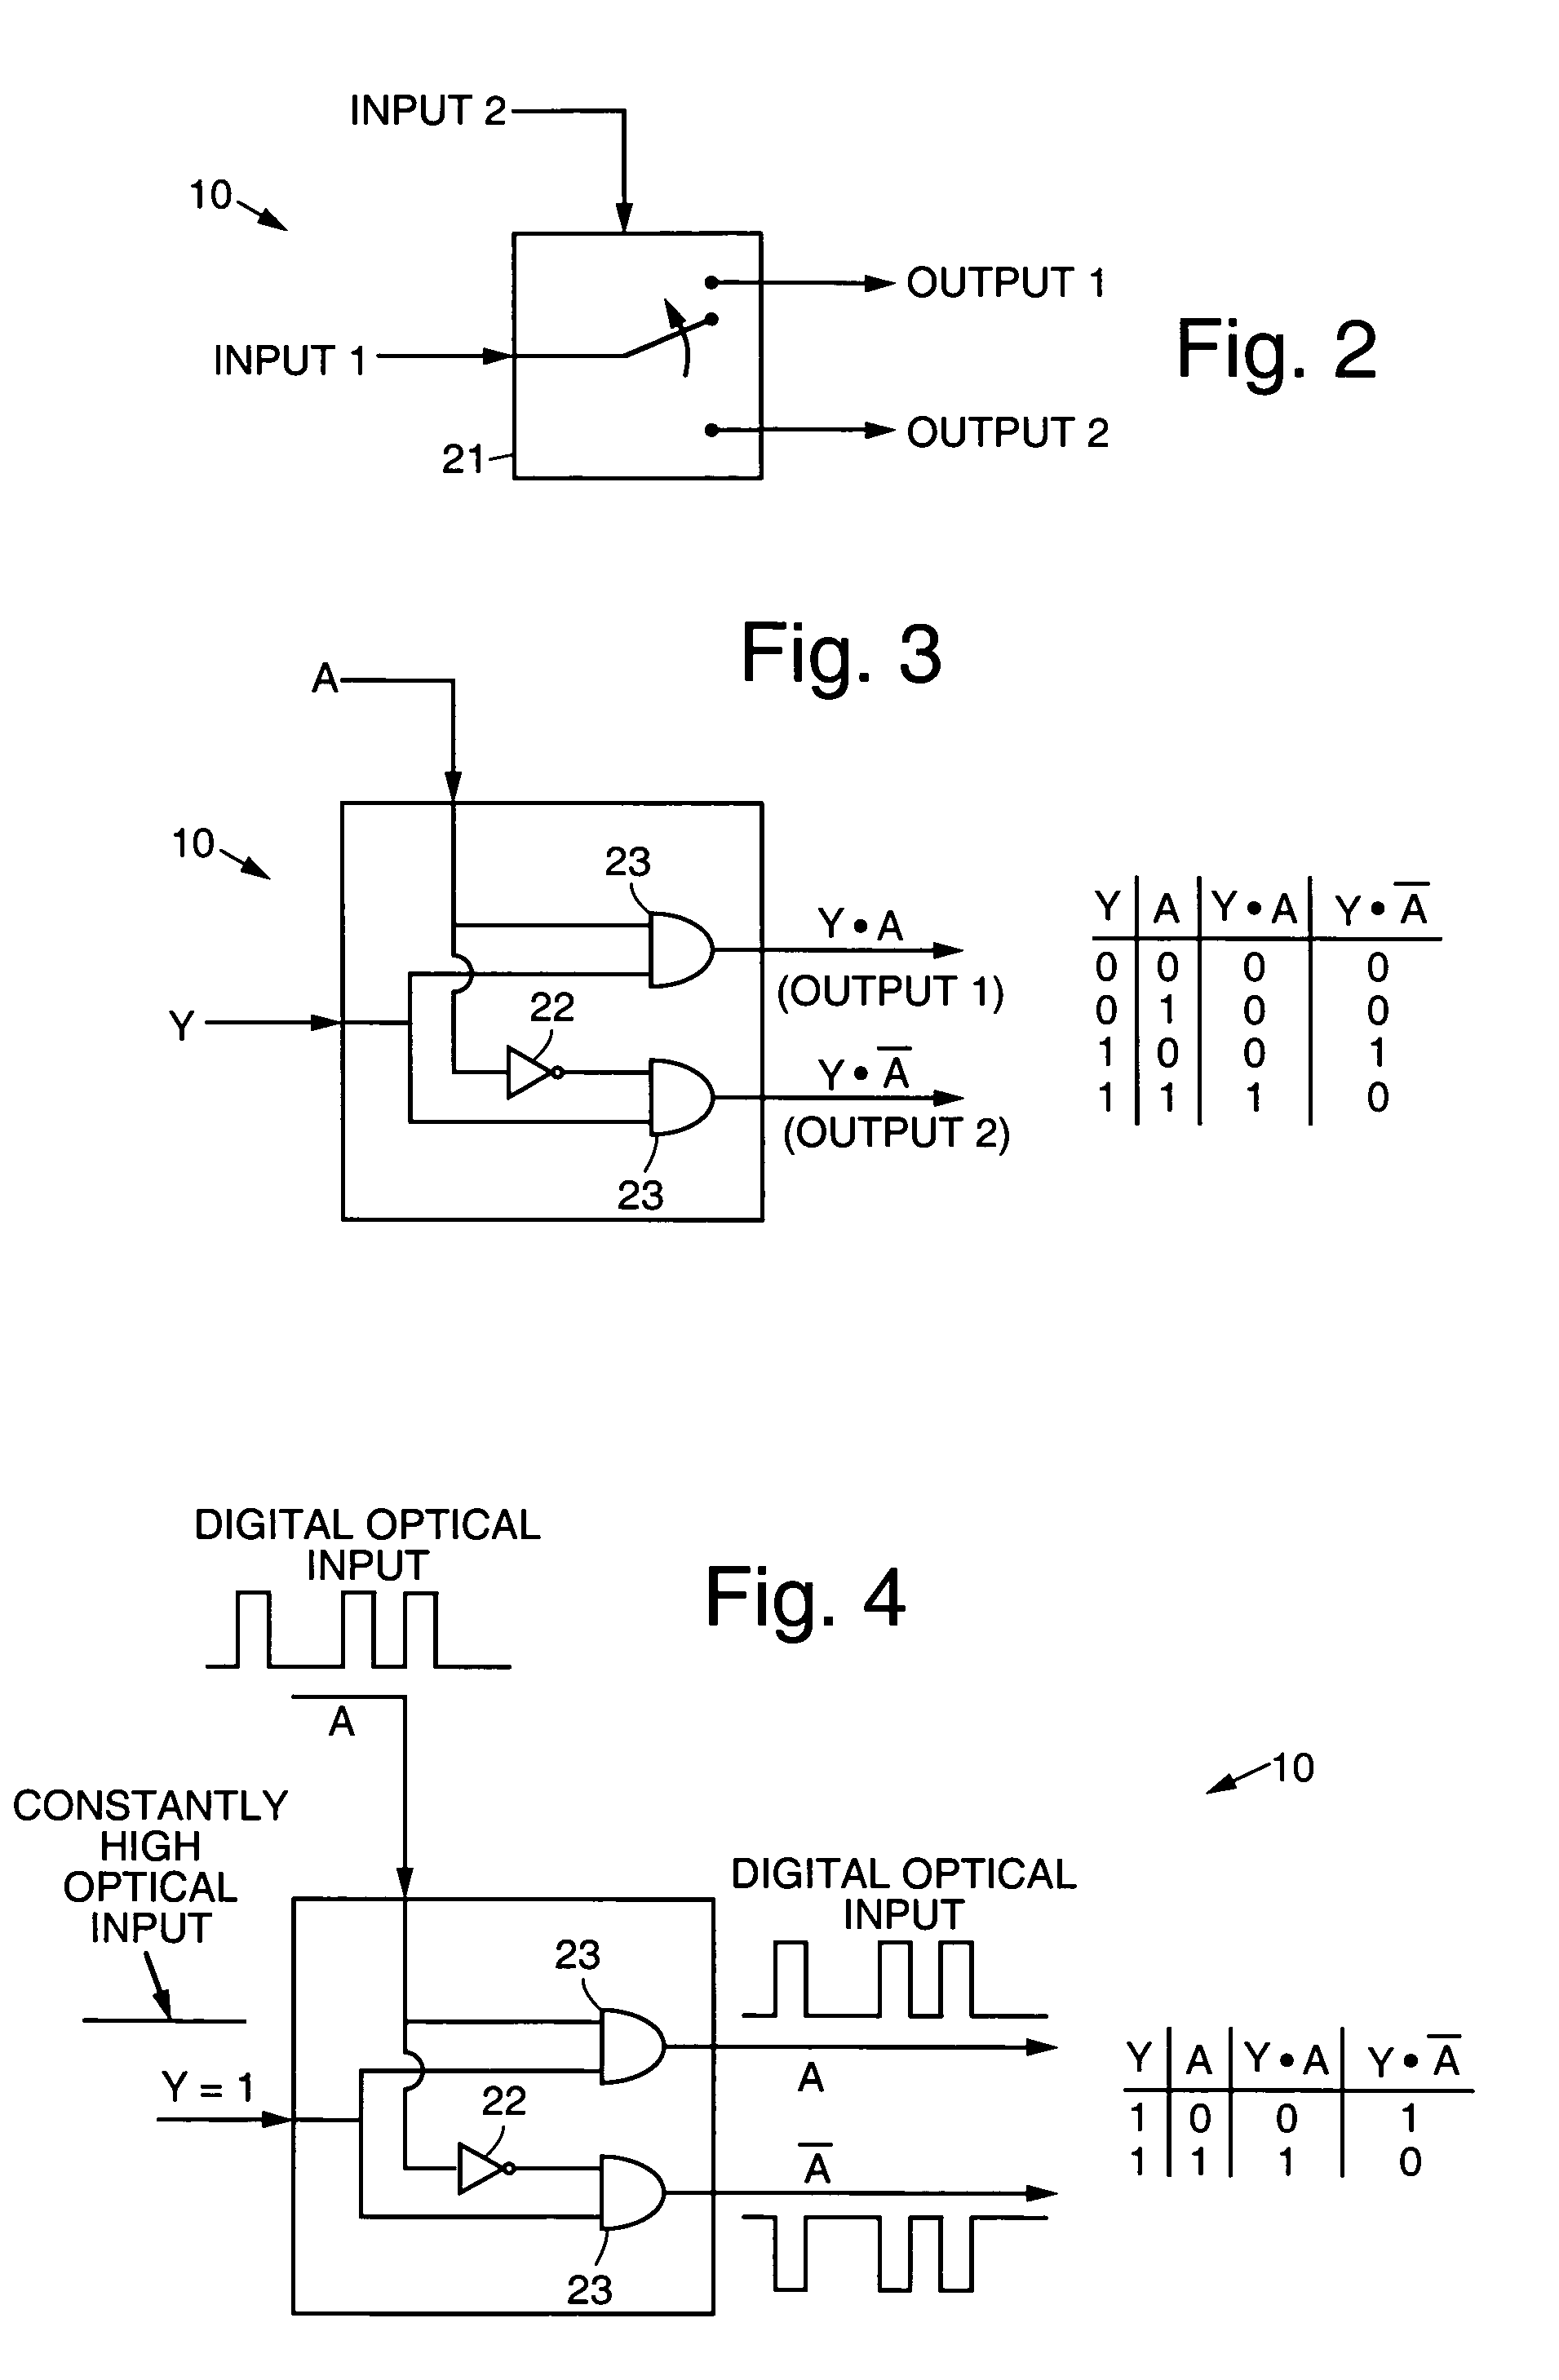 Optical memory and logic using cross-switches